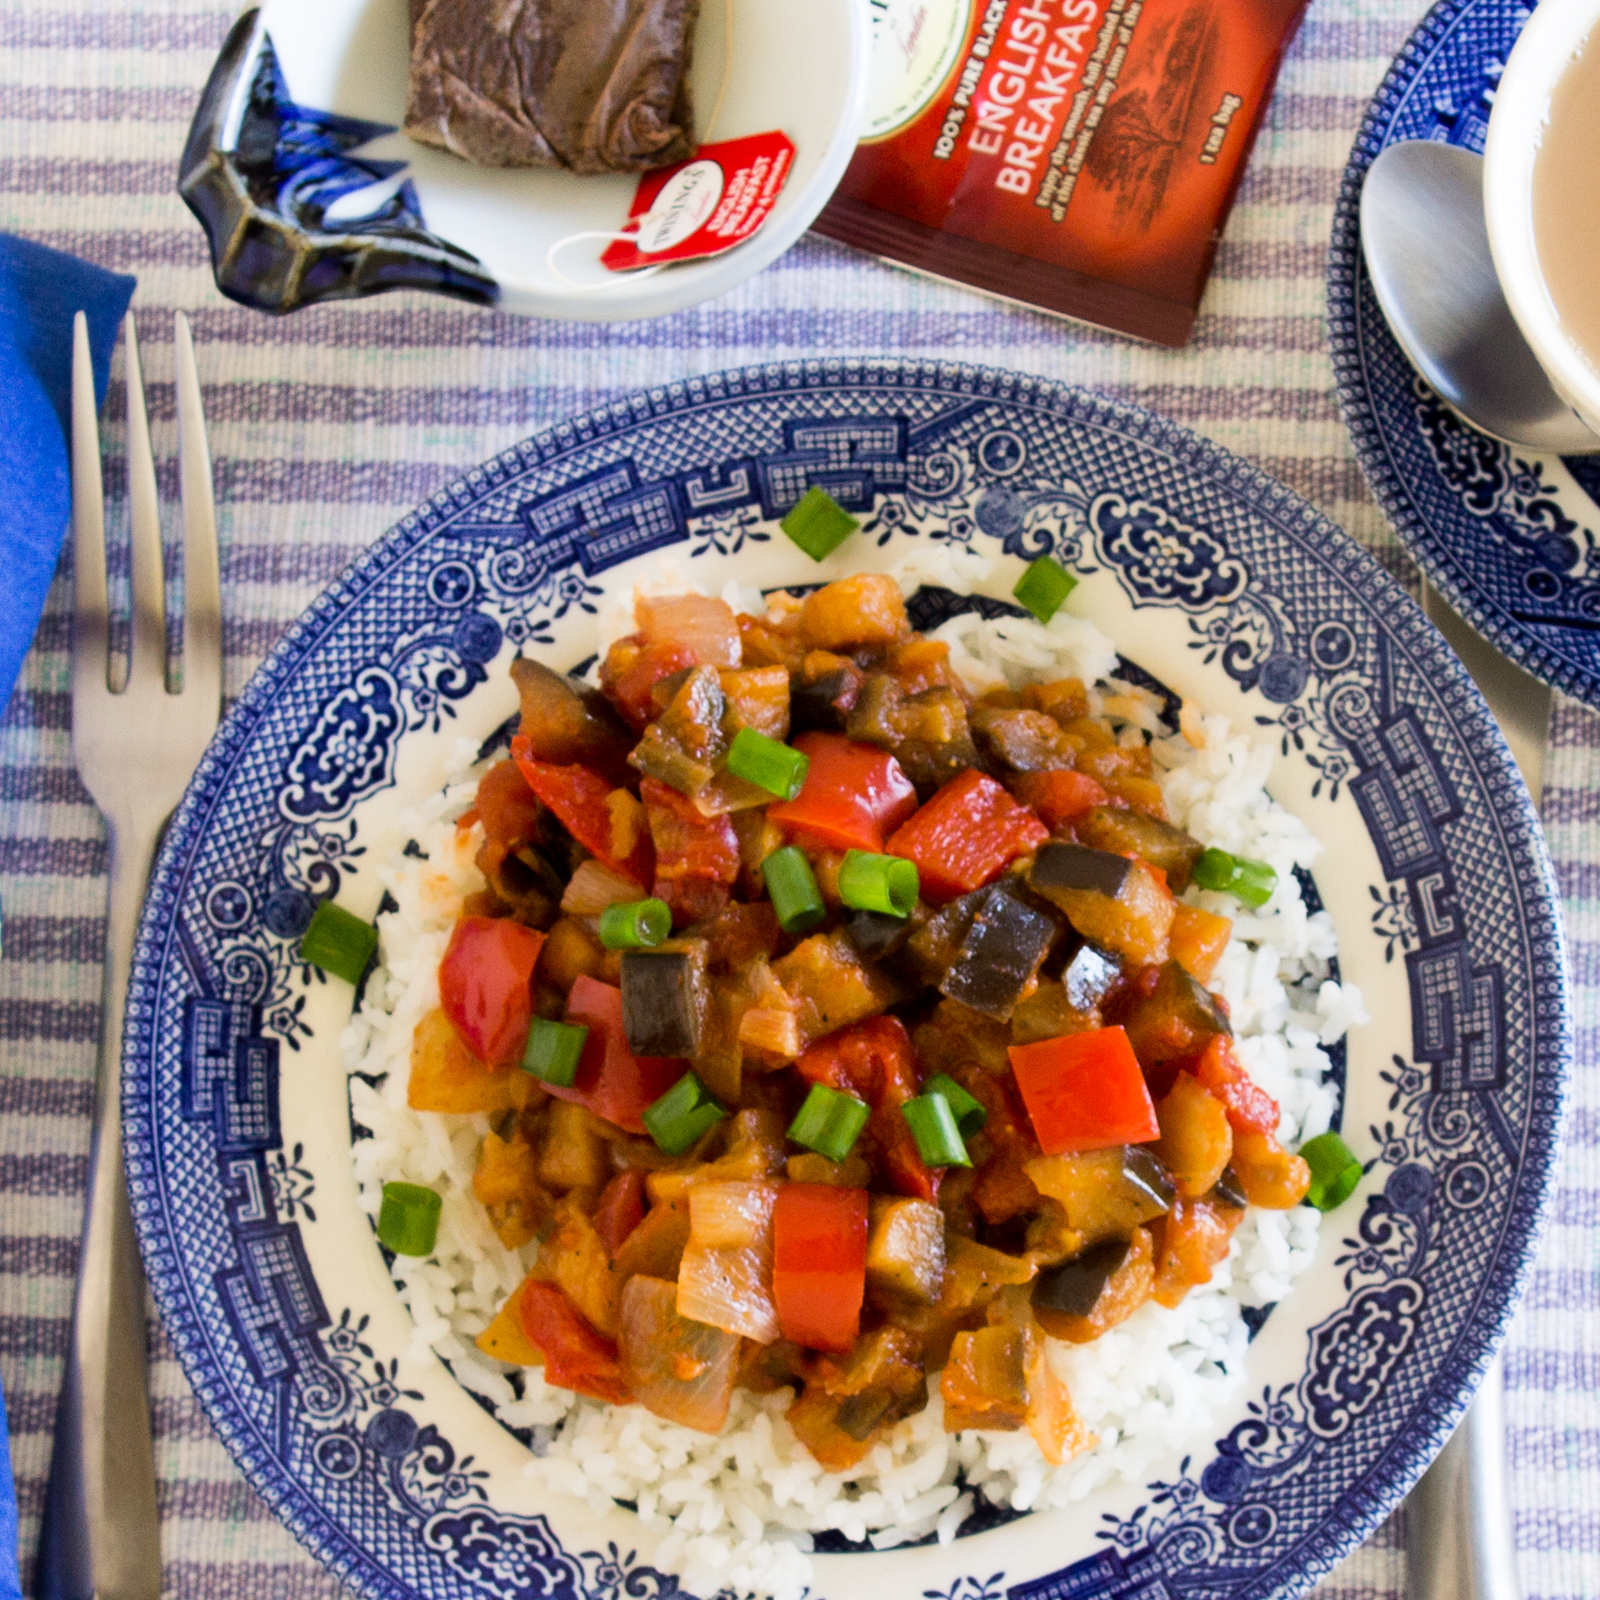 Plate of Sweet and Sour Savory Eggplant on rice.